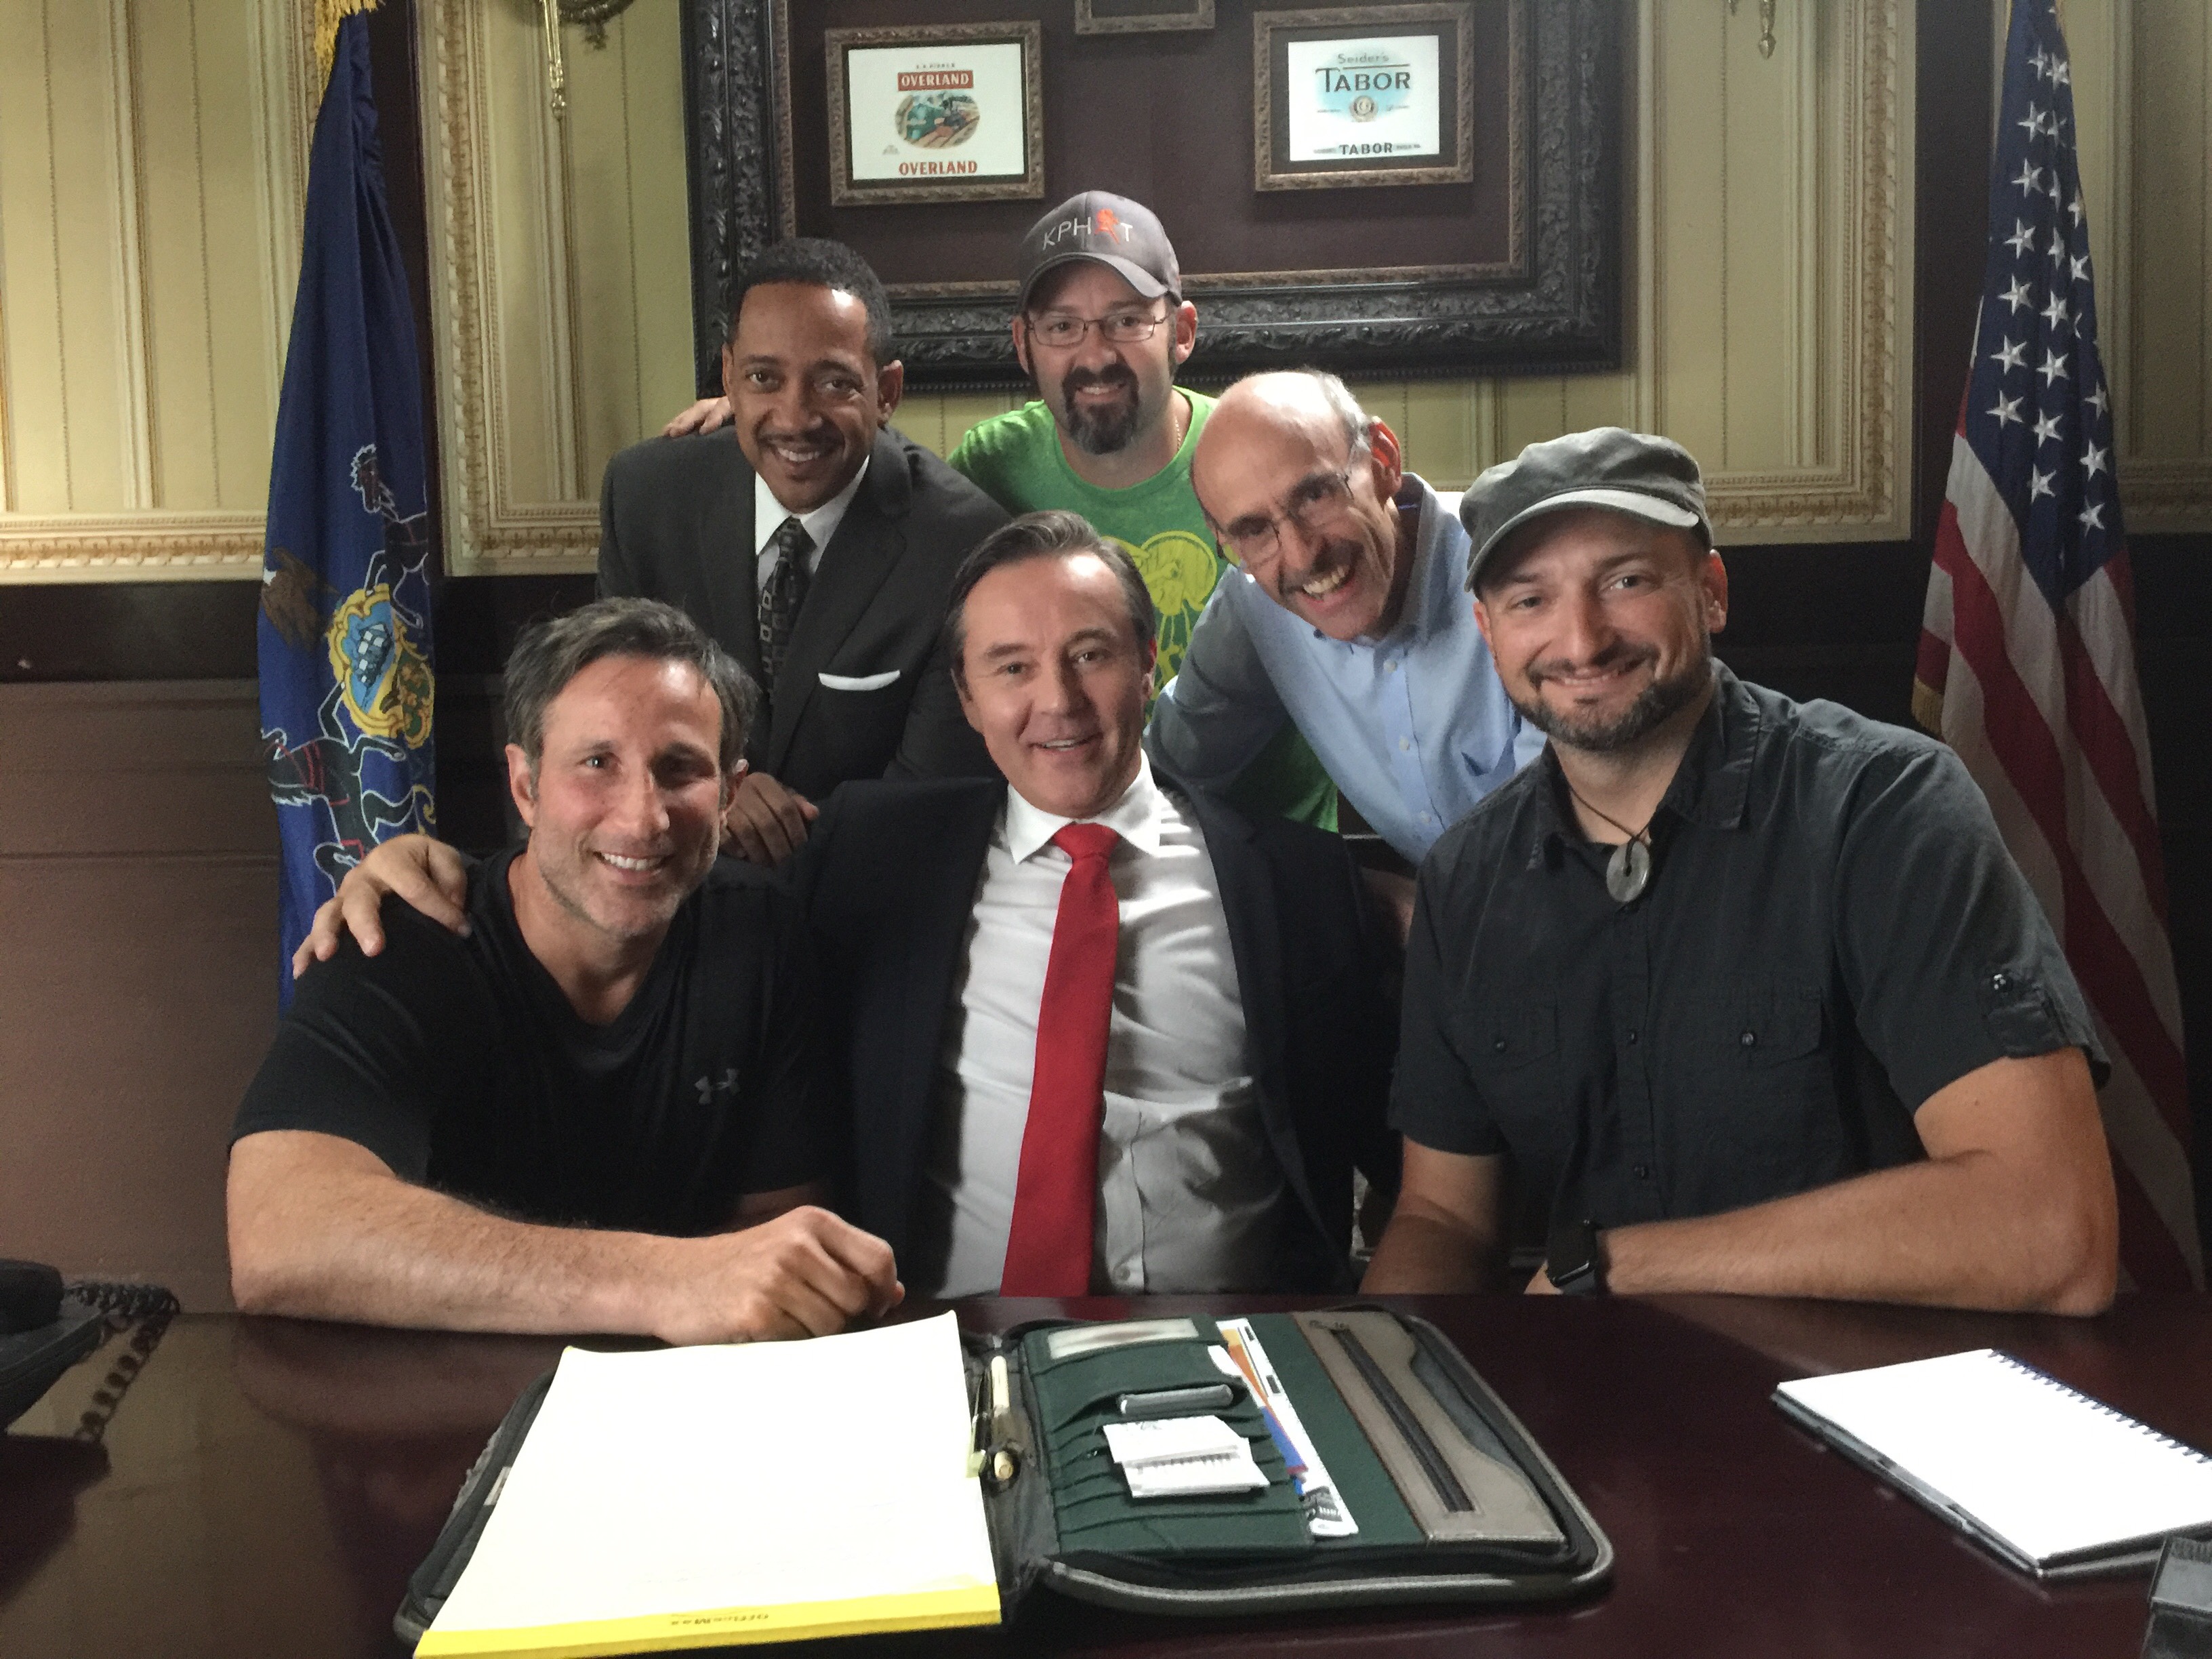 Actors Currie Graham, Chris Mann and Pete Postiglione pose during the filming of My Million Dollar Mom with Ross Schriftman, Screenwriter, Kevin Hackenberg, Director and Joe Herrigan, Director of Phot